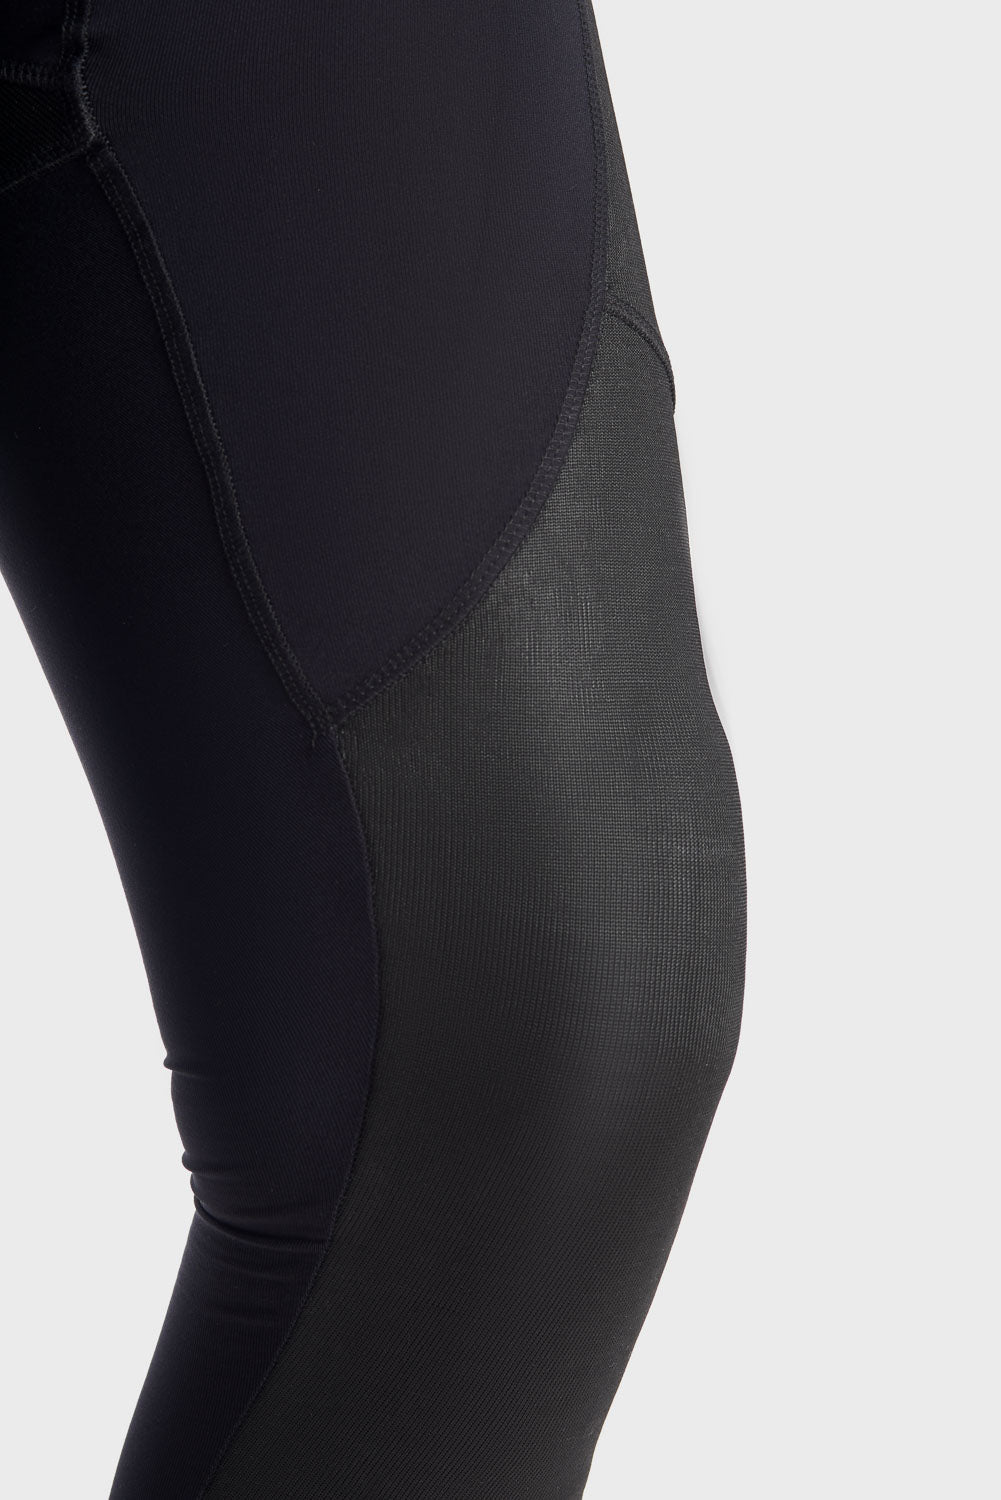 A close up of the knee  wearing Pando Moto SKIN AAA armoured base layer leggings in black